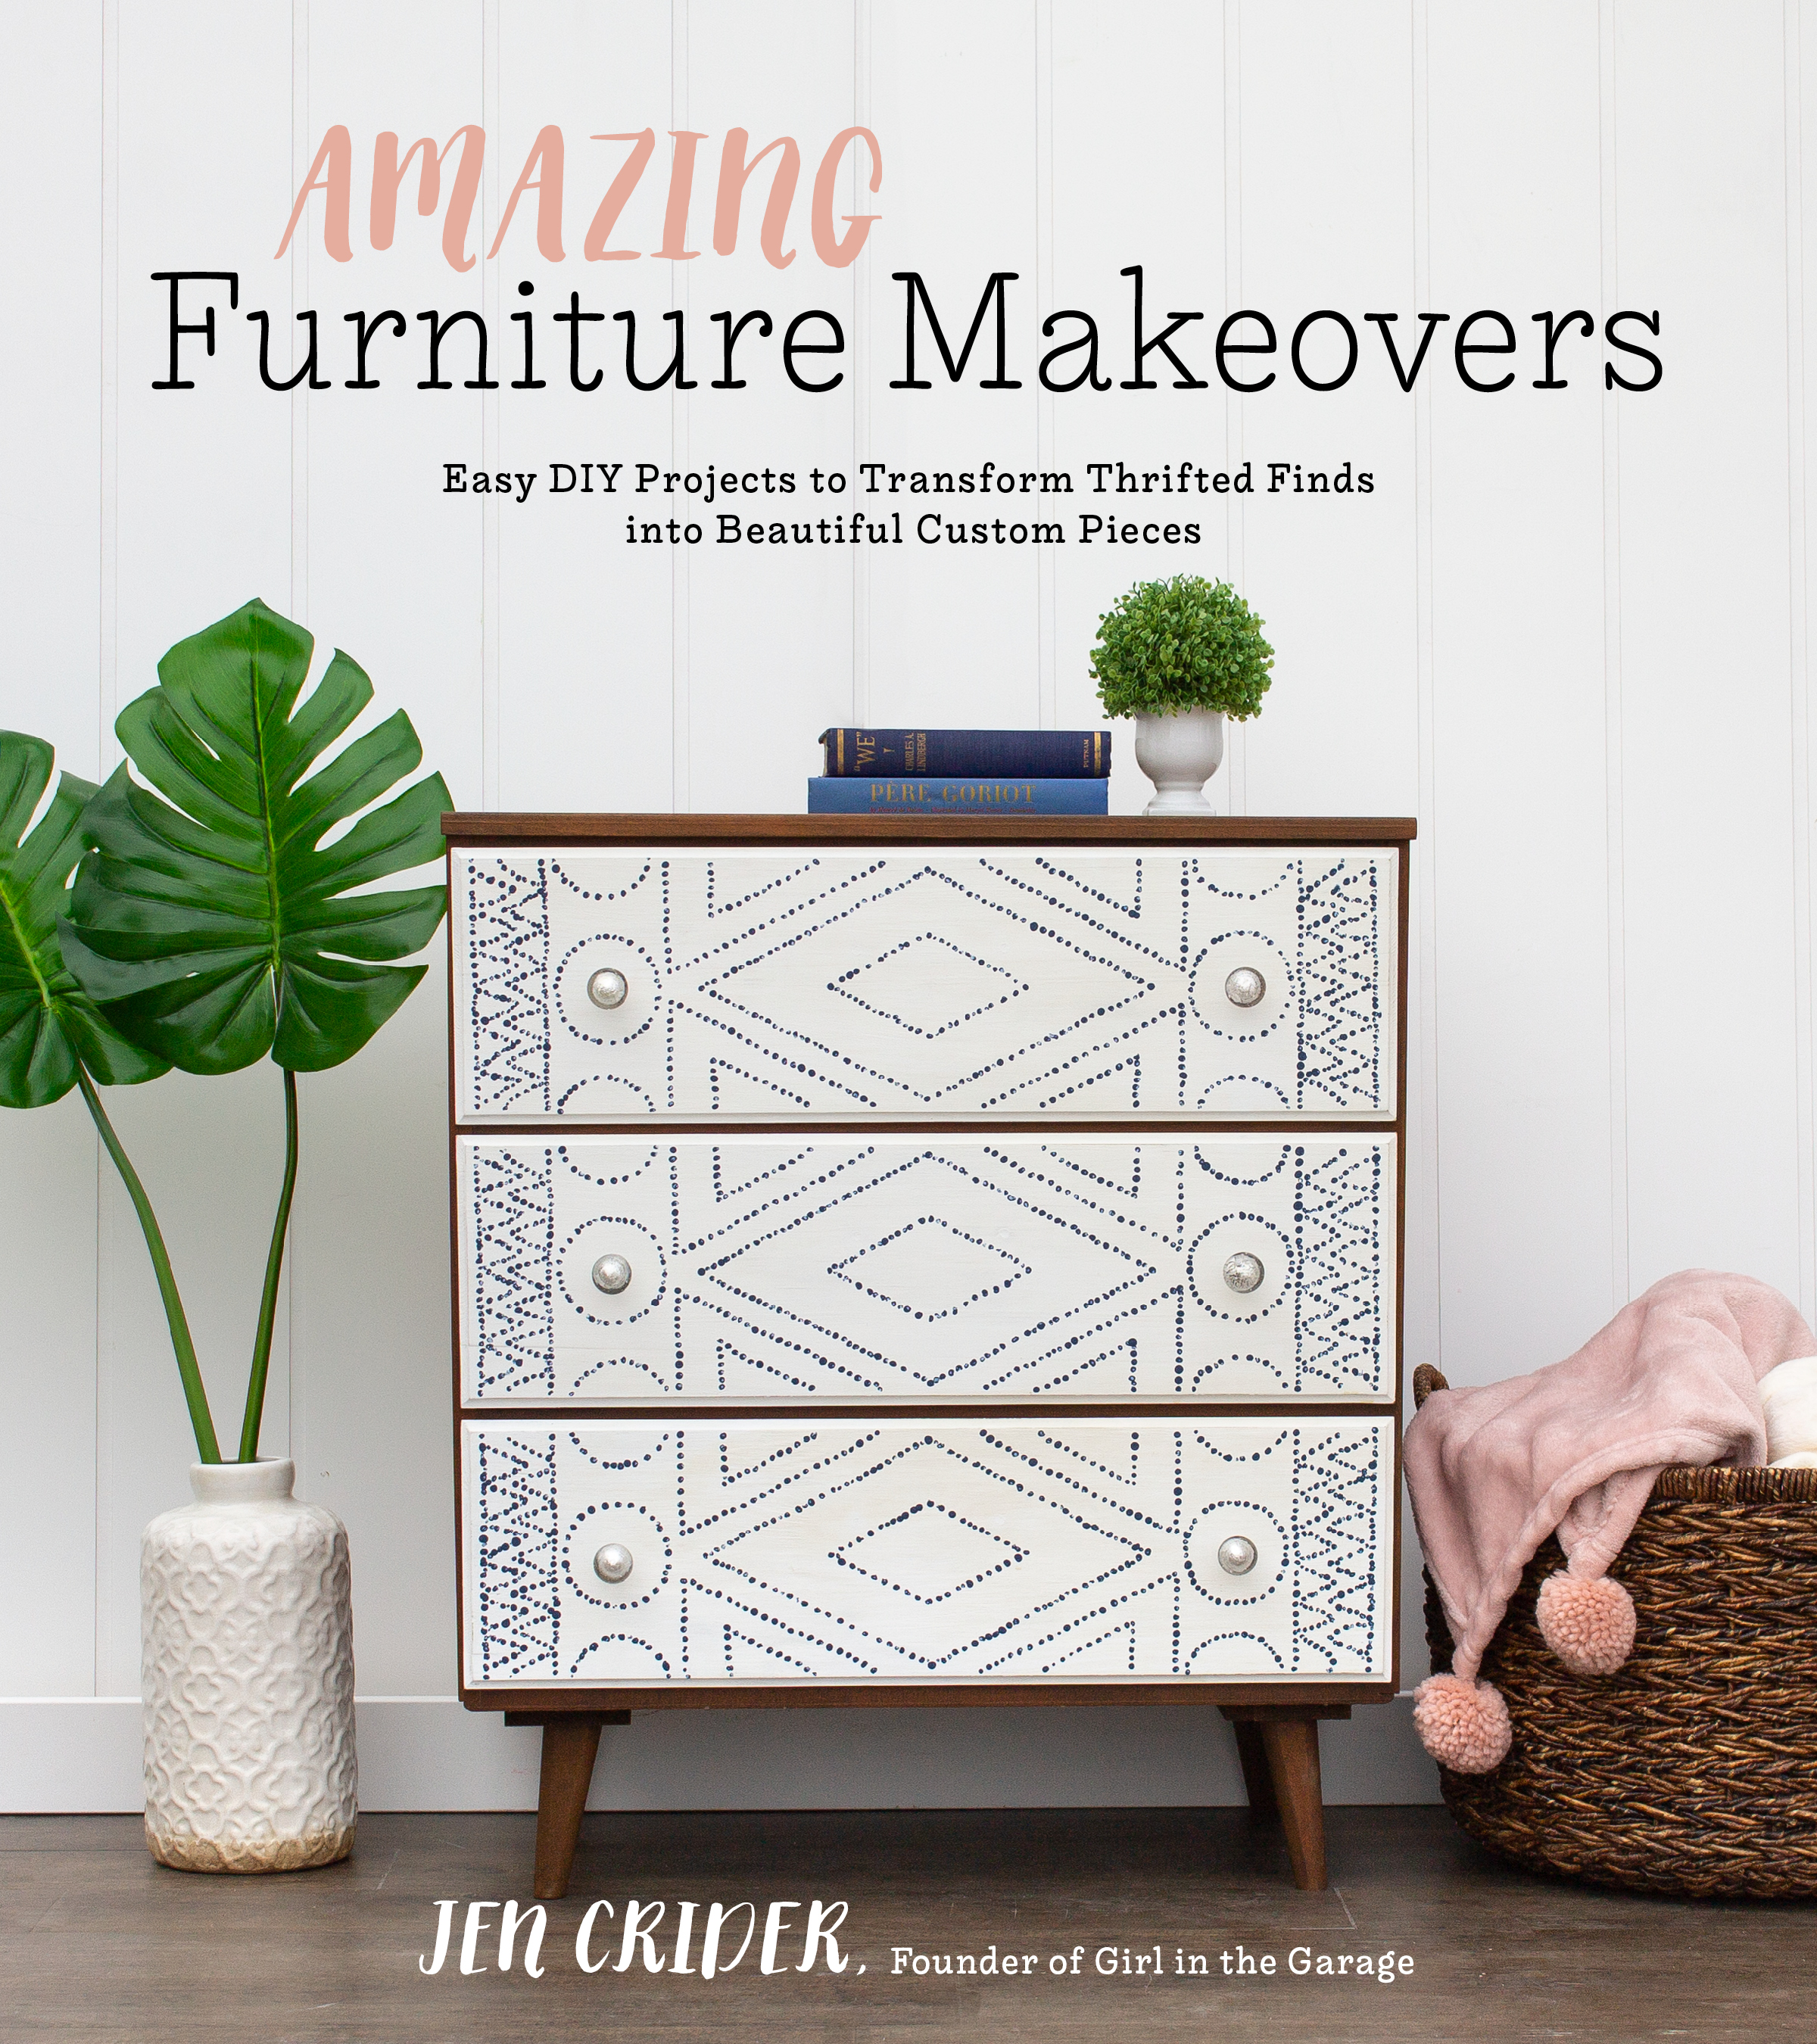 Amazing Furniture Makeovers – Awesome New Book Plus a Giveaway!